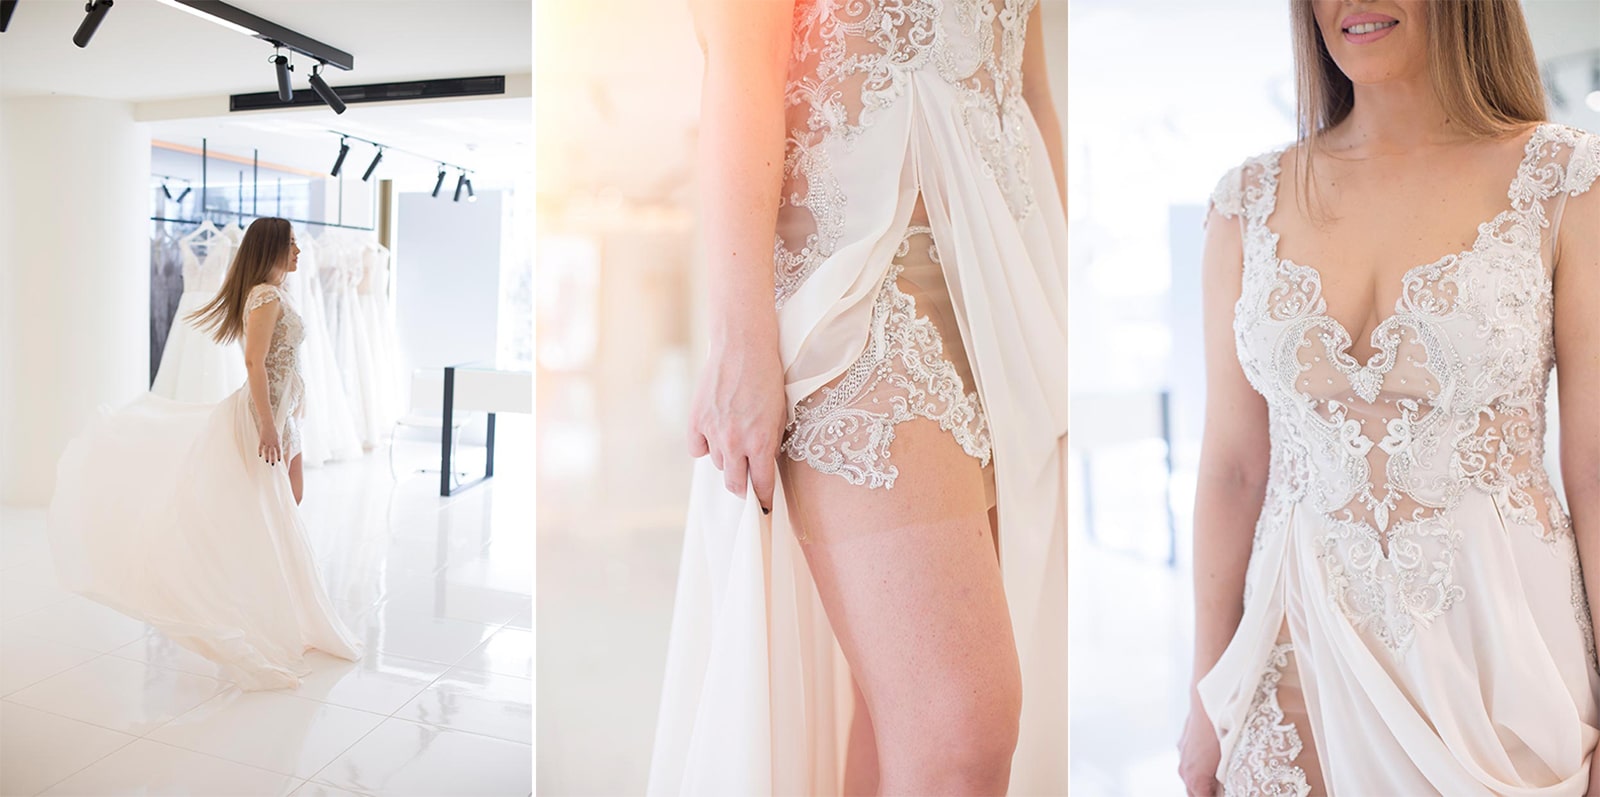 short wedding dress and ethereal skirt with edgy cuts